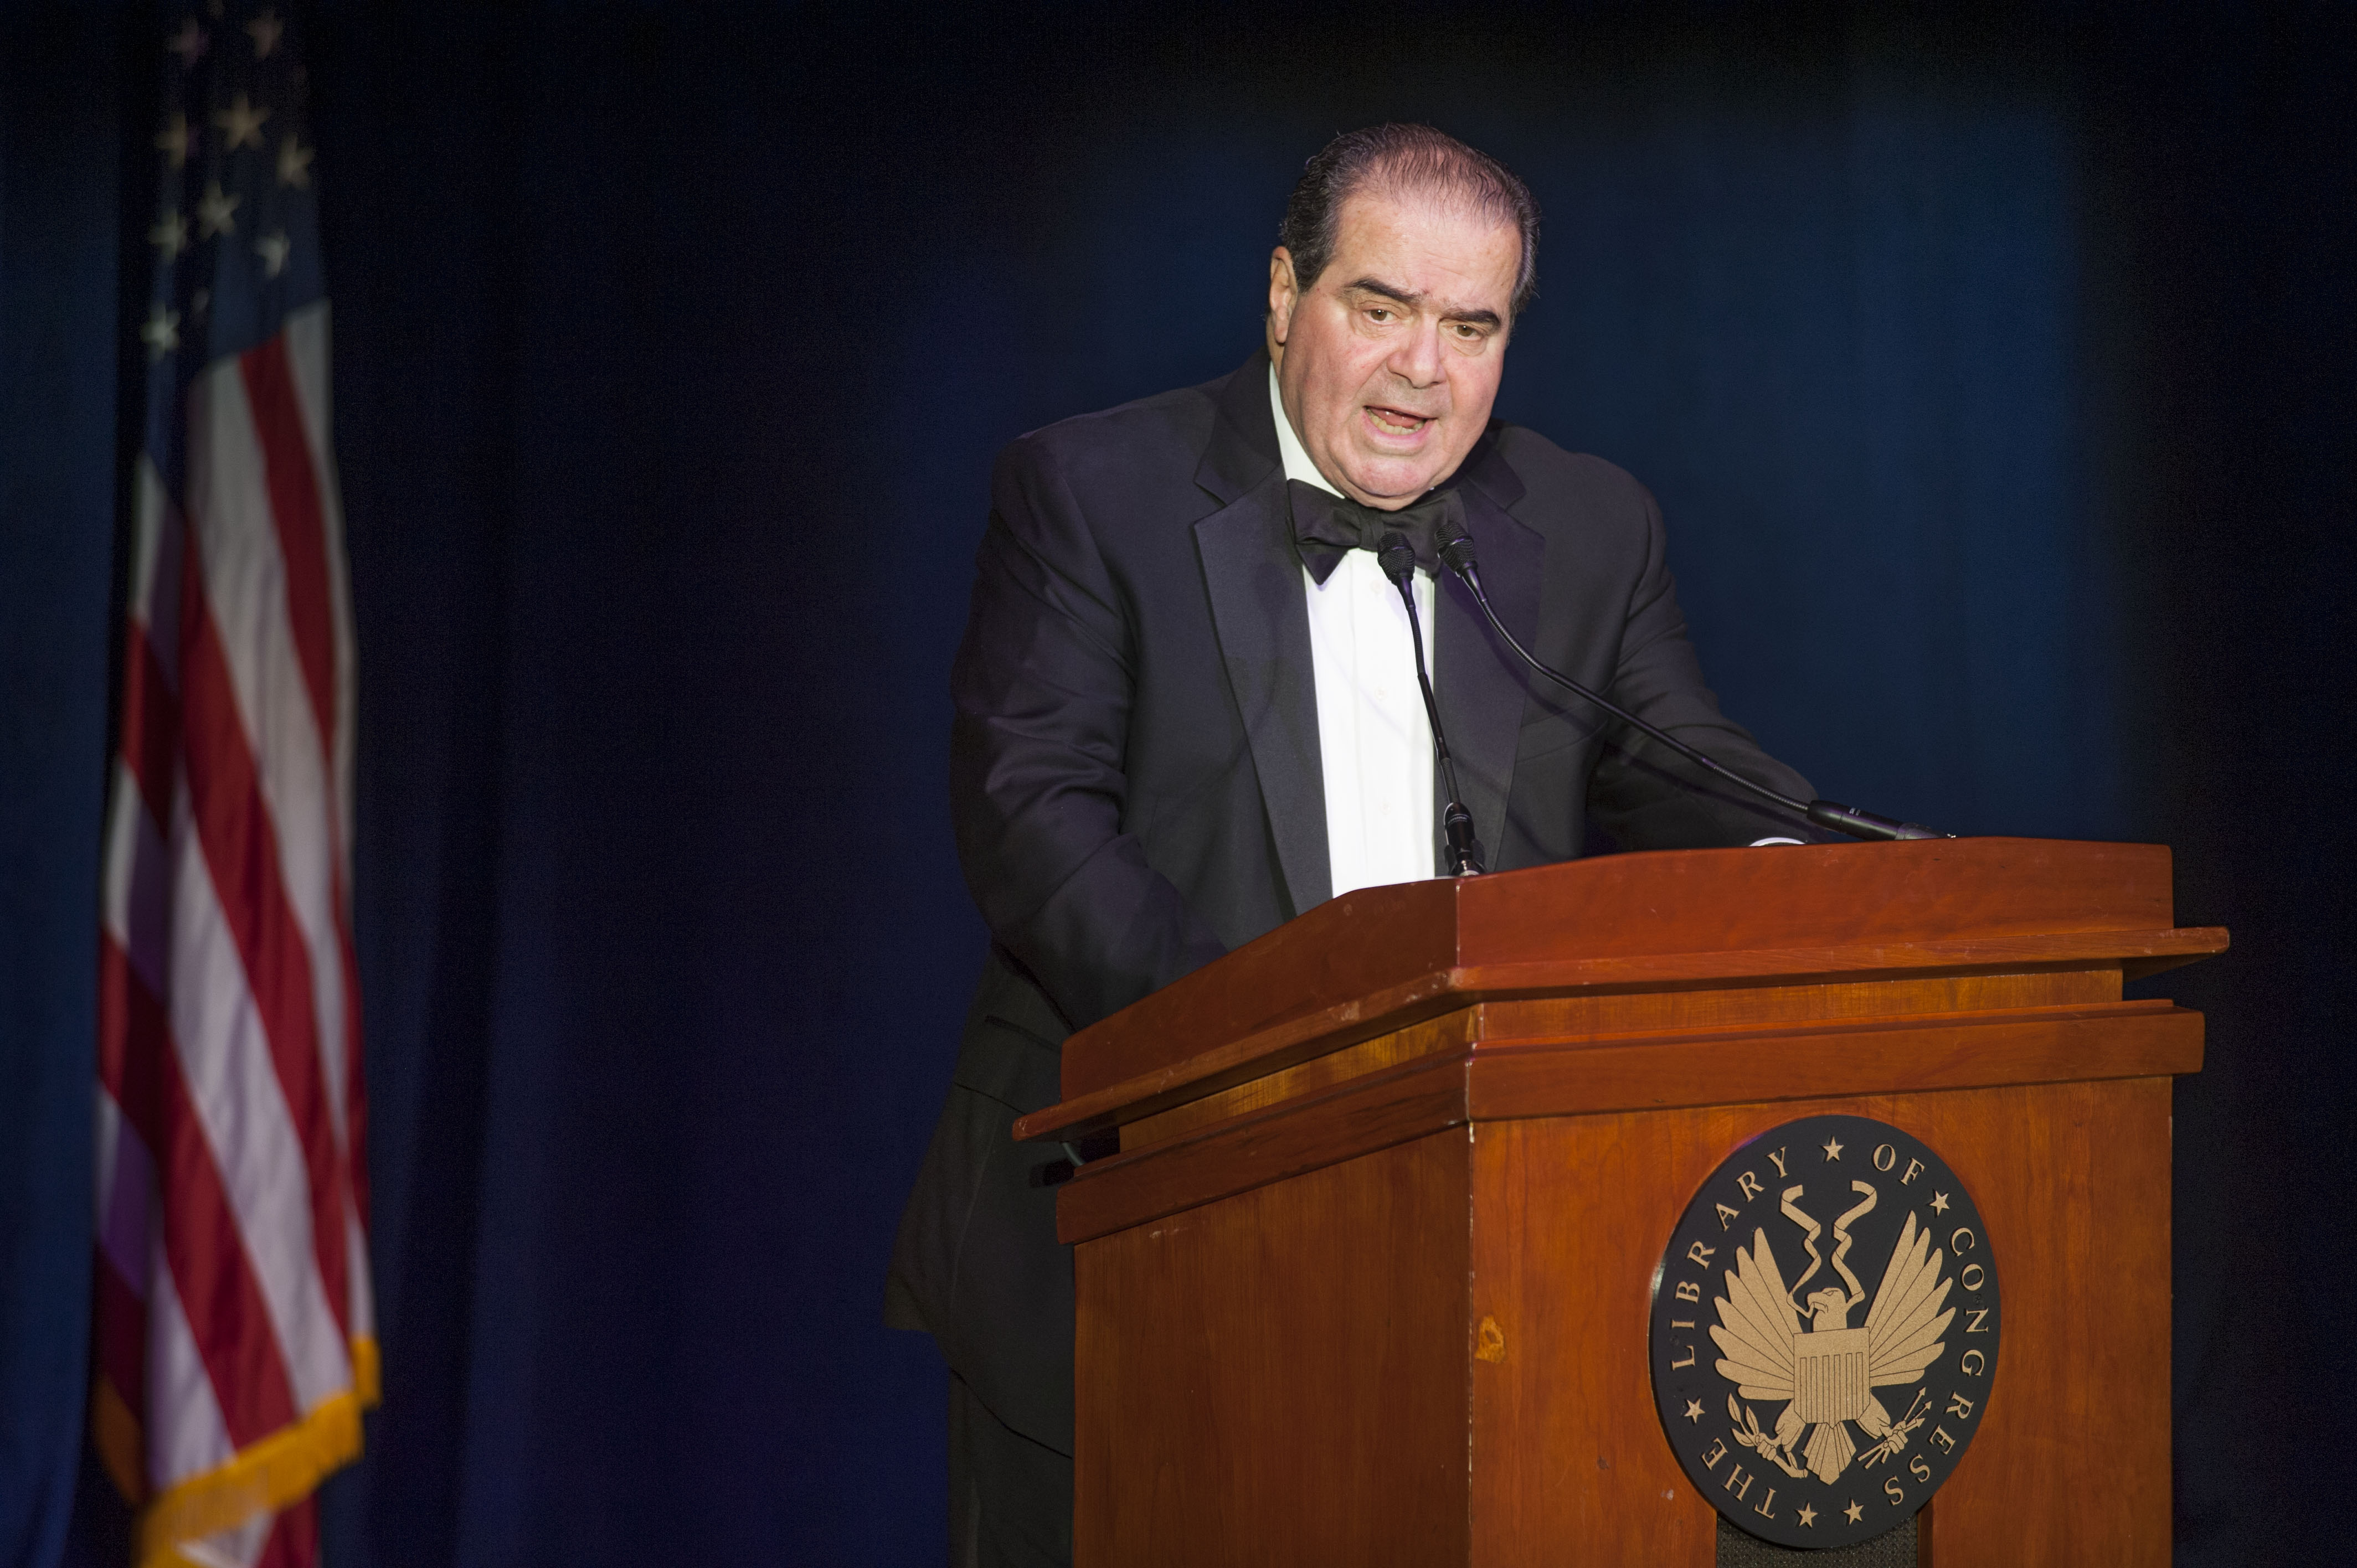 Justice Antonin Scalia at the "Magna Carta: Muse and Mentor" evening program at the Library of Congress on Nov. 6, 2014. (Kevin Wolf—AP)